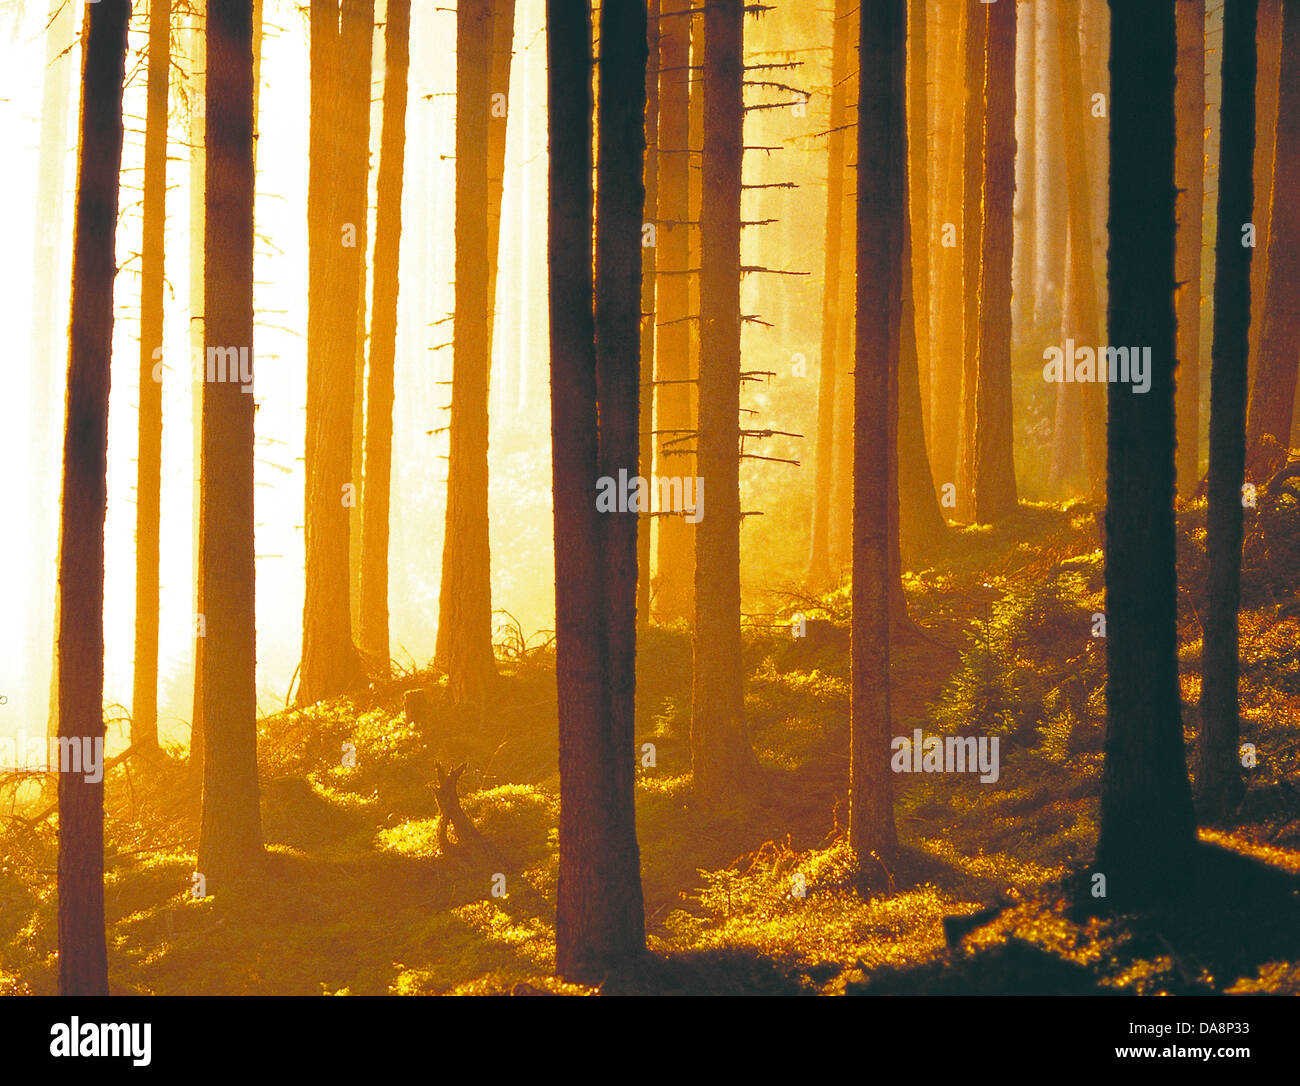 Austria, Europe, Tyrol, Sistrans, Patscherkofel, wood, forest, morning, morning mood, morning light, timber forest, spruce fores Stock Photo